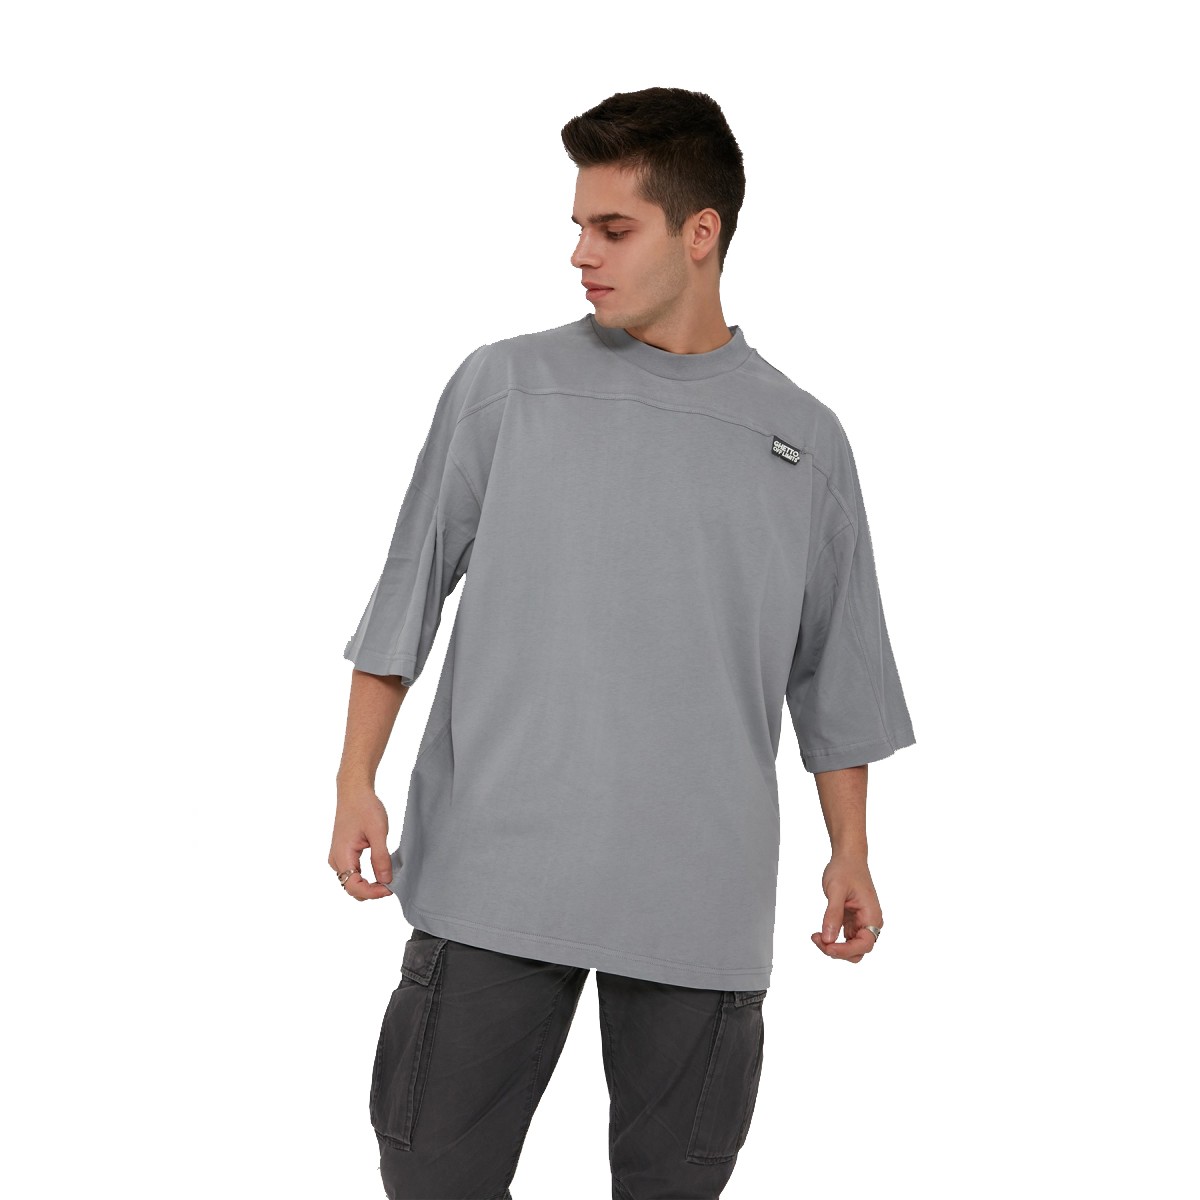 Ghetto Off Limits Panelled Grey Oversize T-Shirt TS-10017